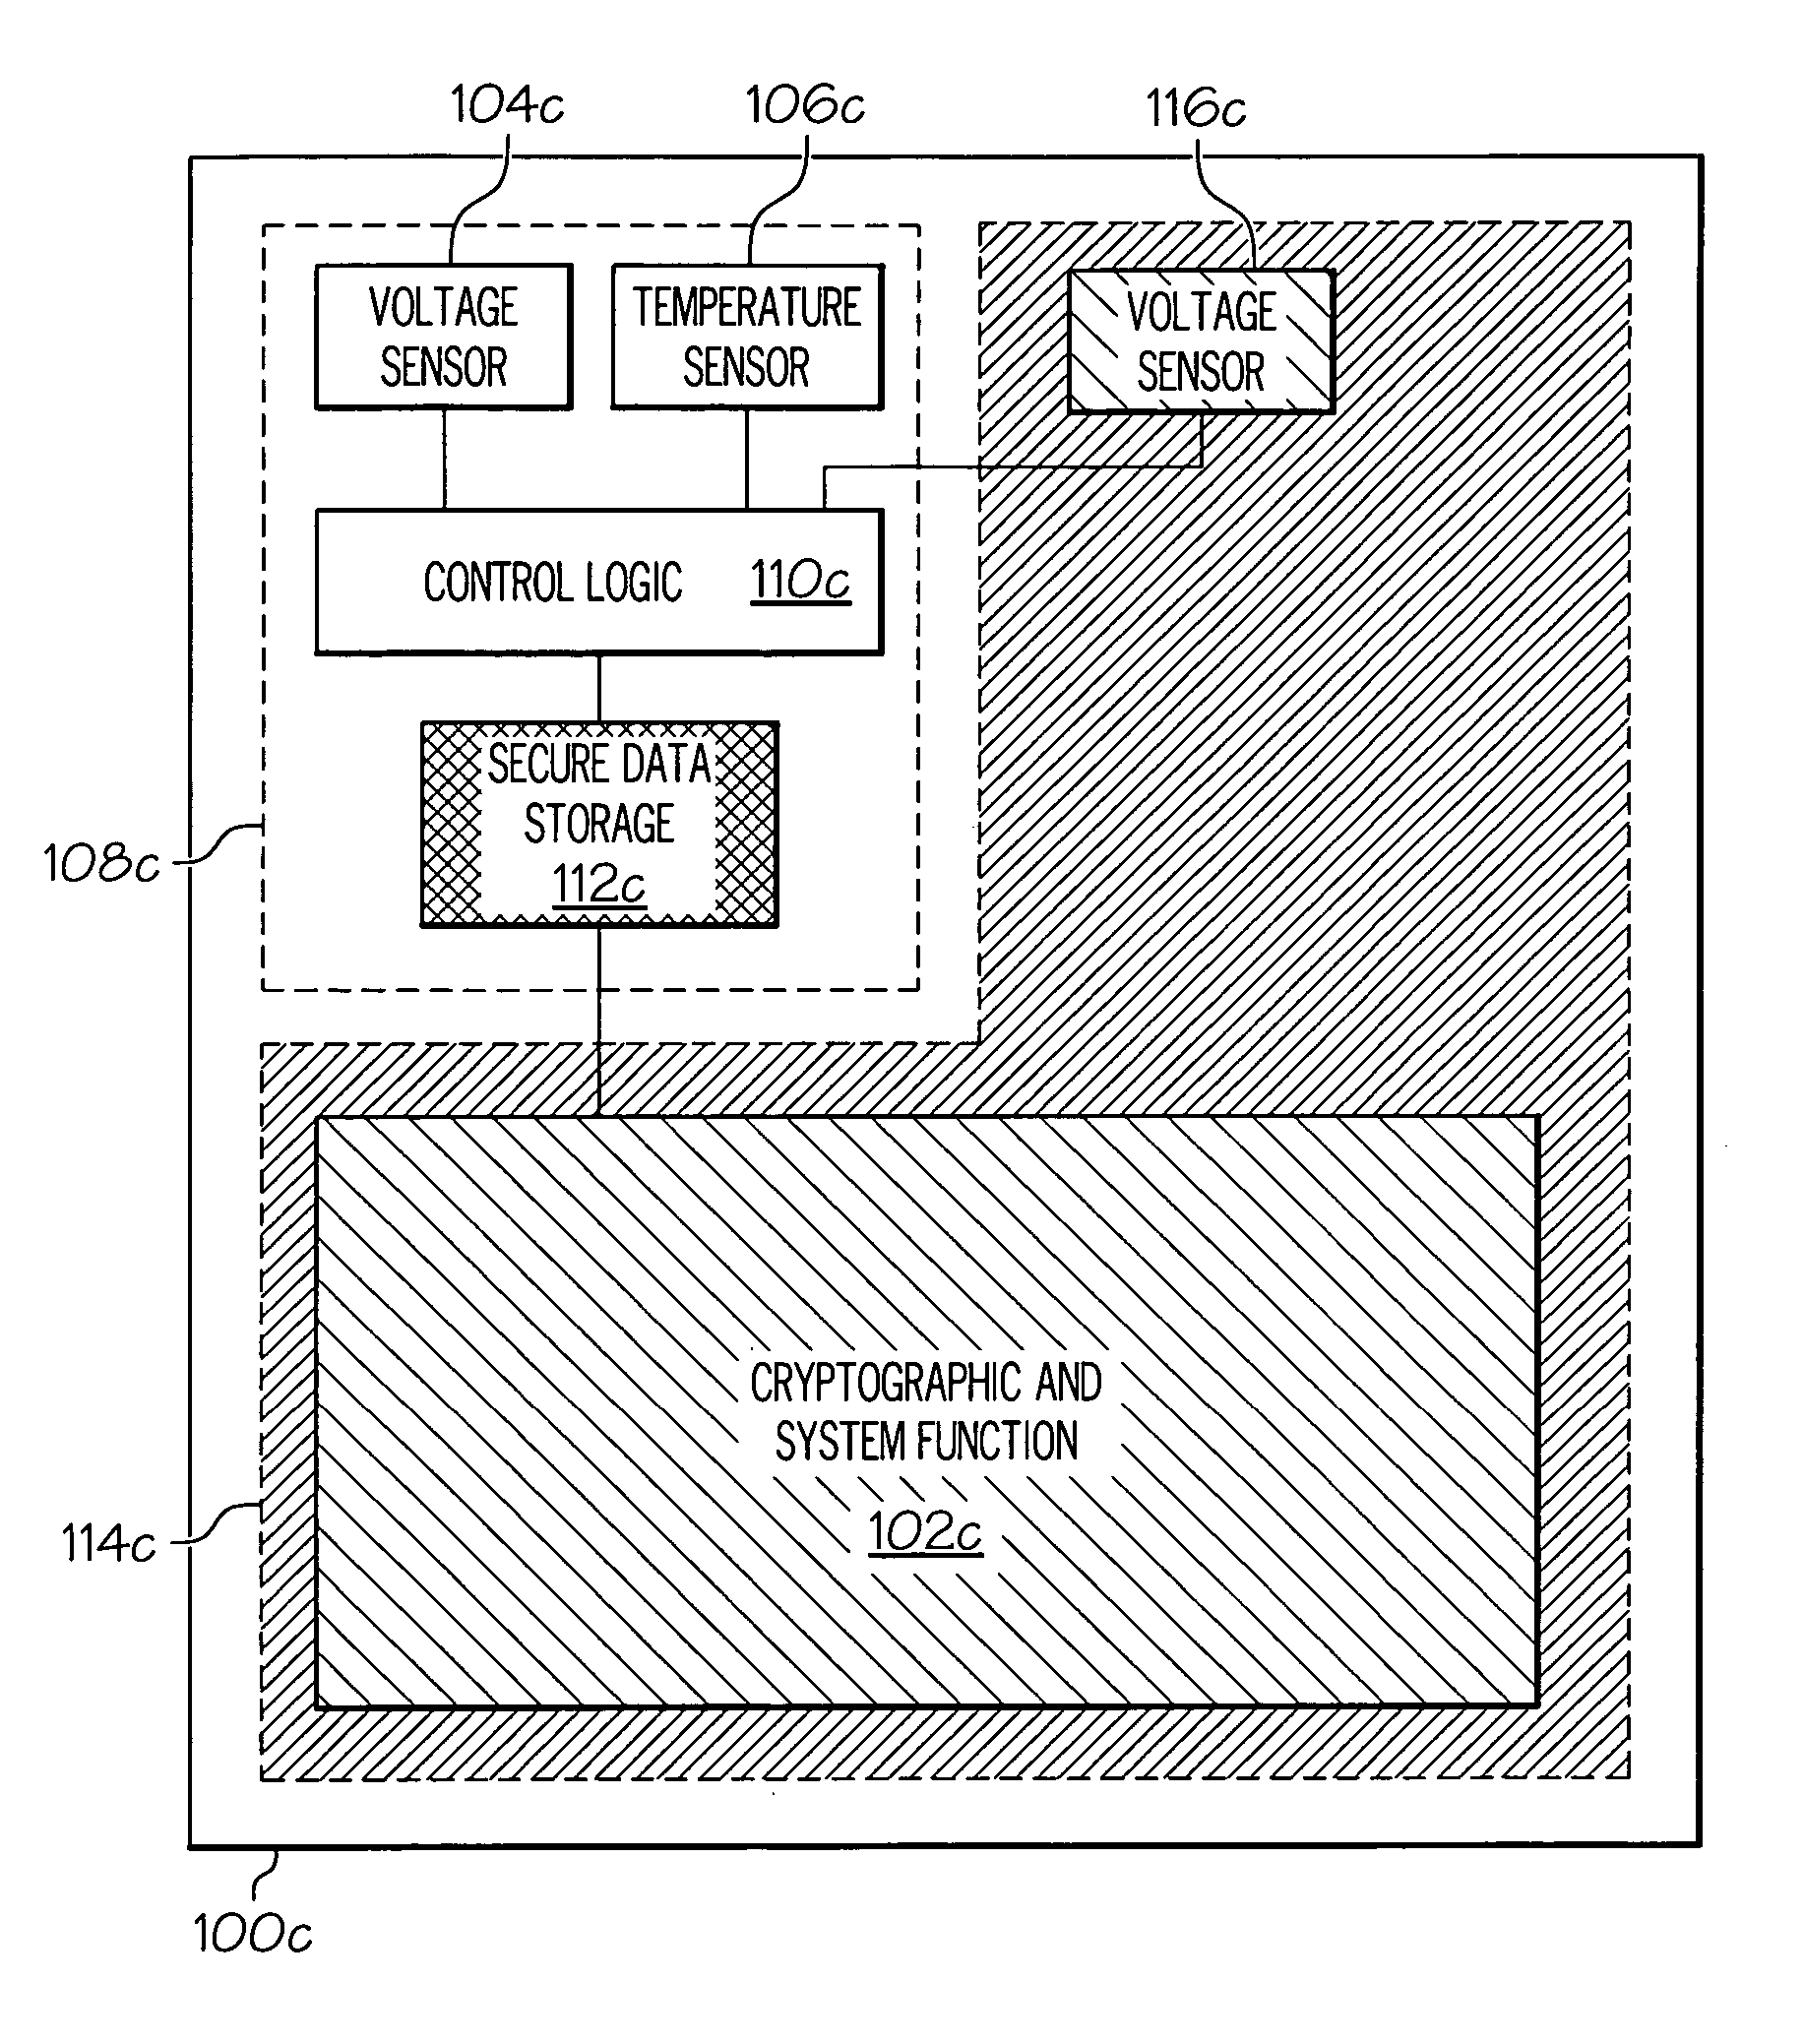 Cryptographic circuit with voltage-based tamper detection and response circuitry